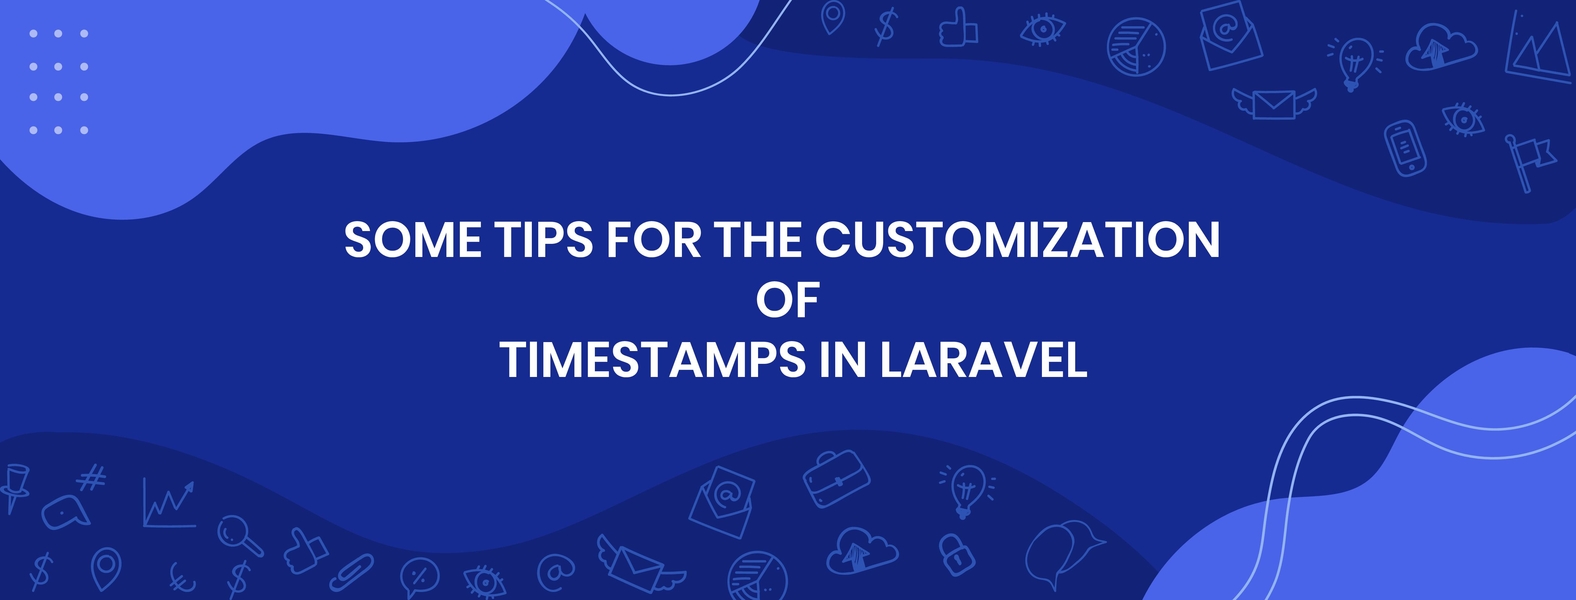 Some Tips for the Customization of Laravel Timestamps 